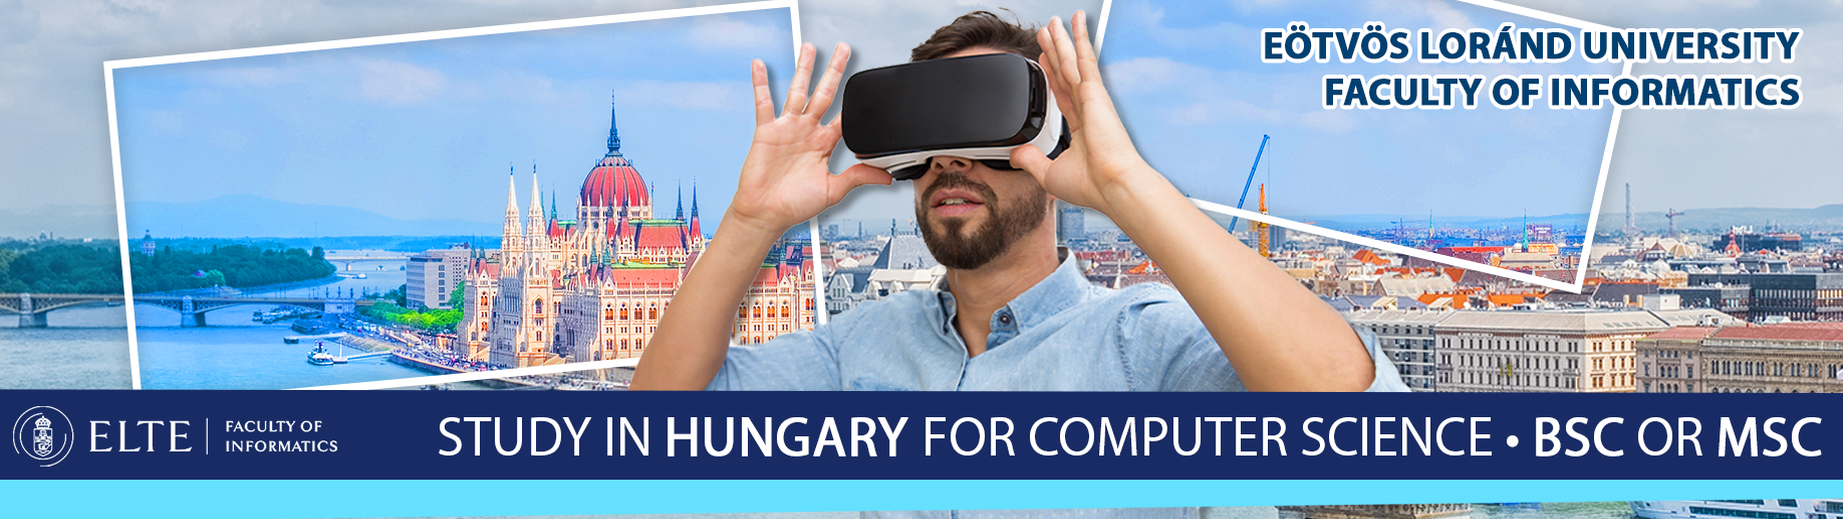 Study in Hungary for Computer Science Bsc, Msc degree